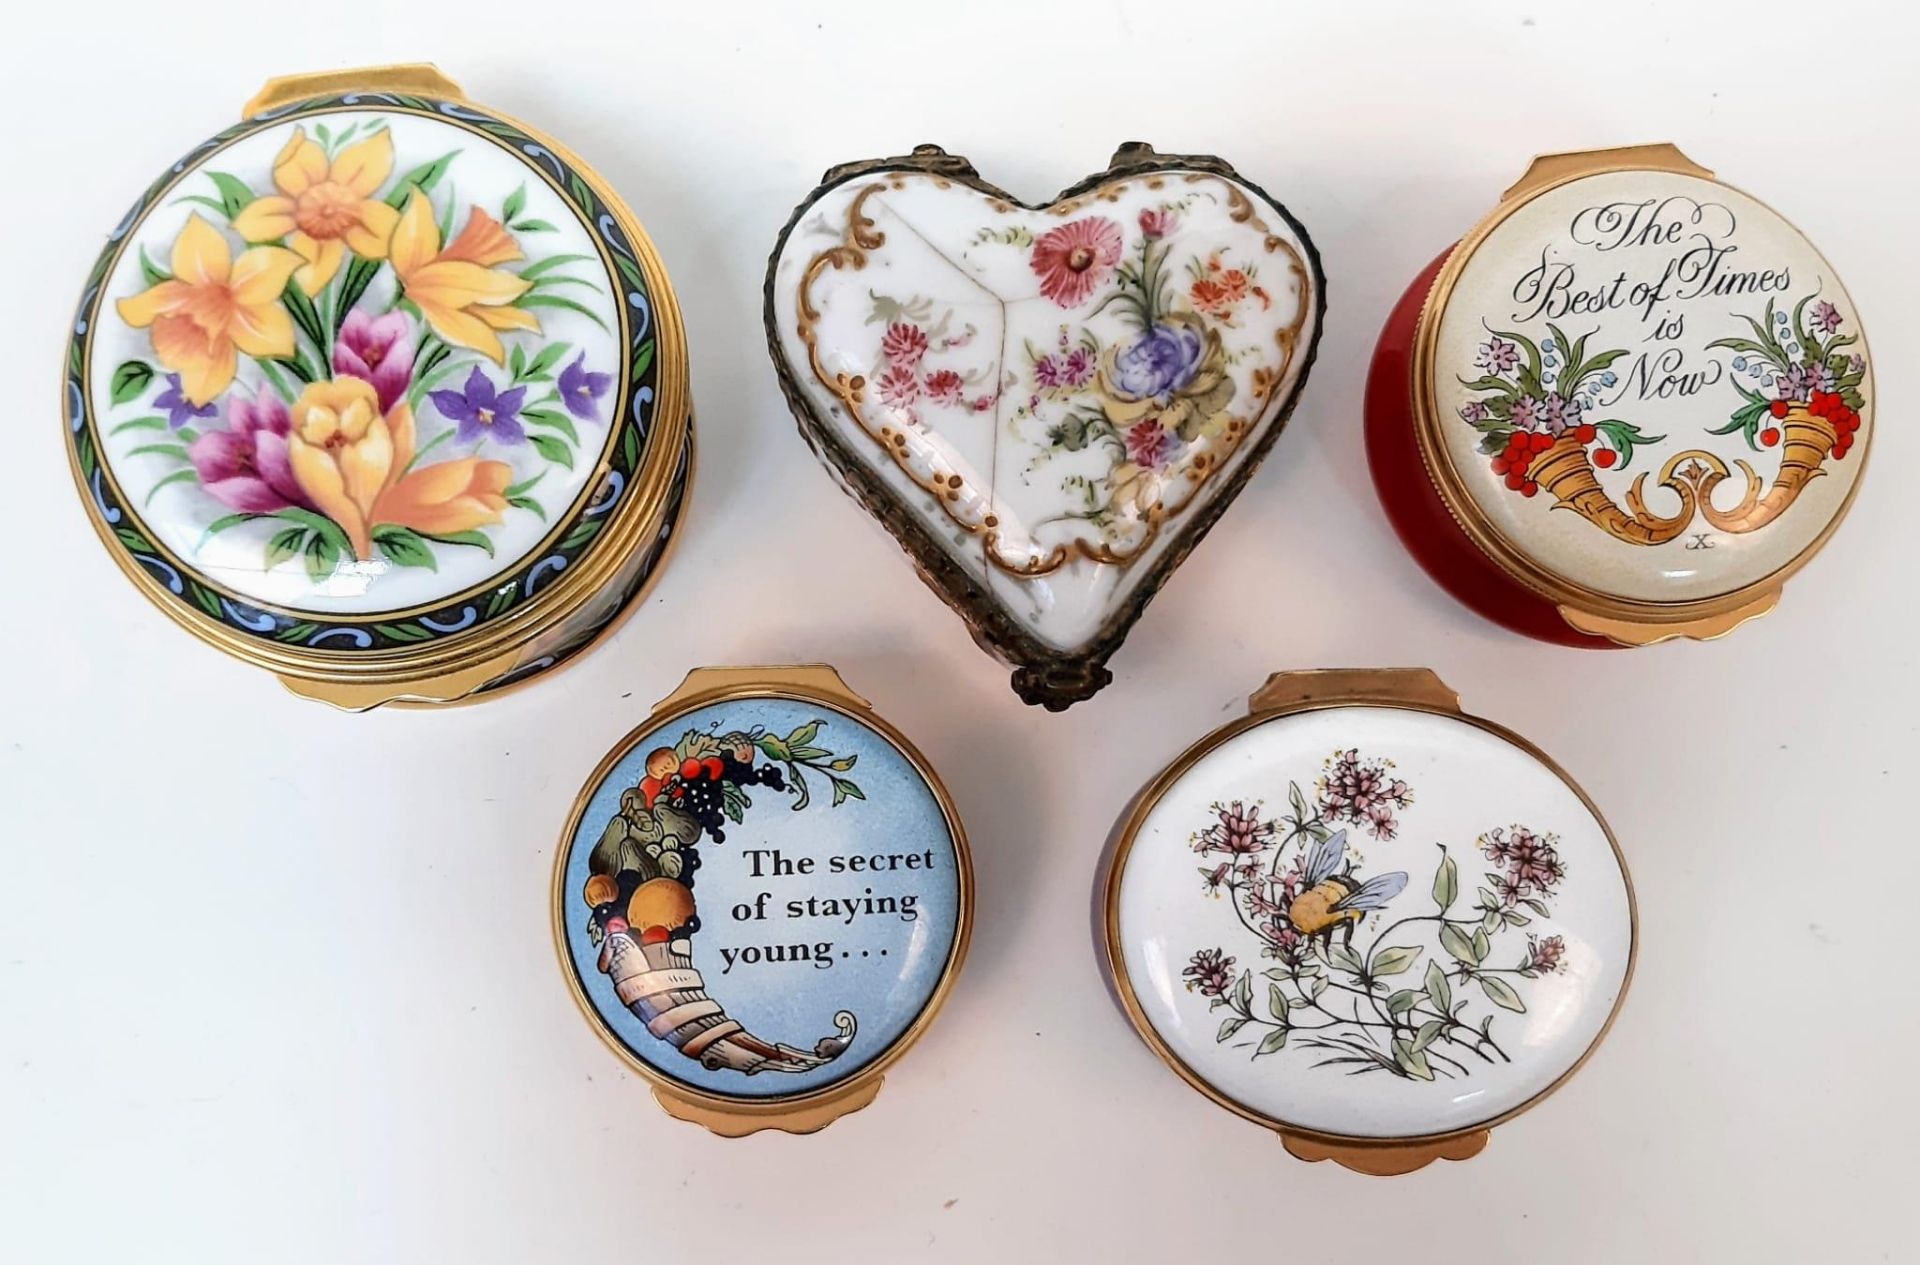 A Selection of Five Vintage/Antique Ceramic and Enamel Small Trinket Boxes. Different shapes, styles